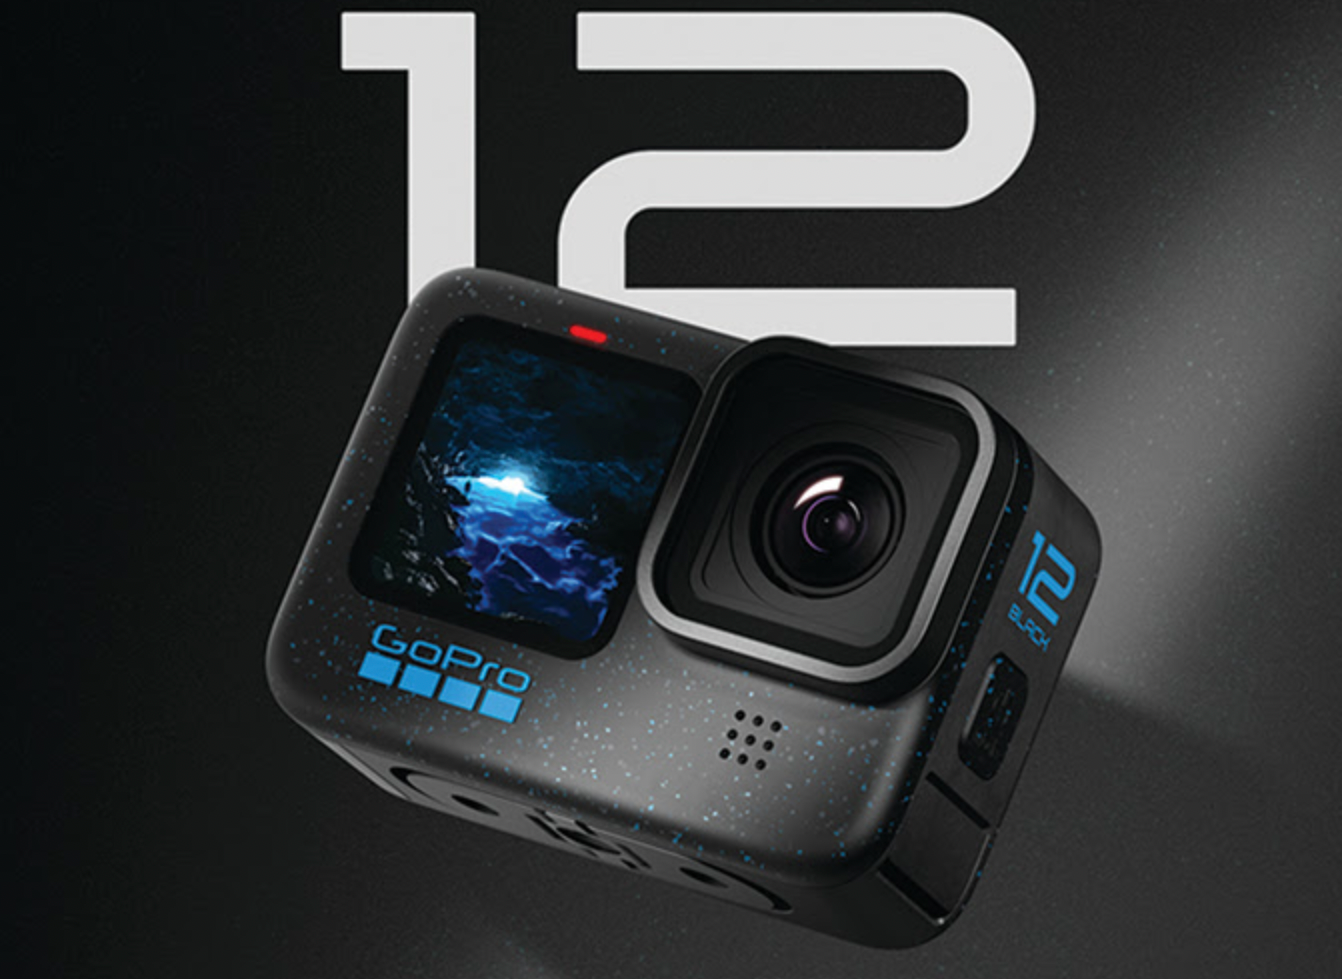 Review: Is the GoPro Hero 12 Black worth it?